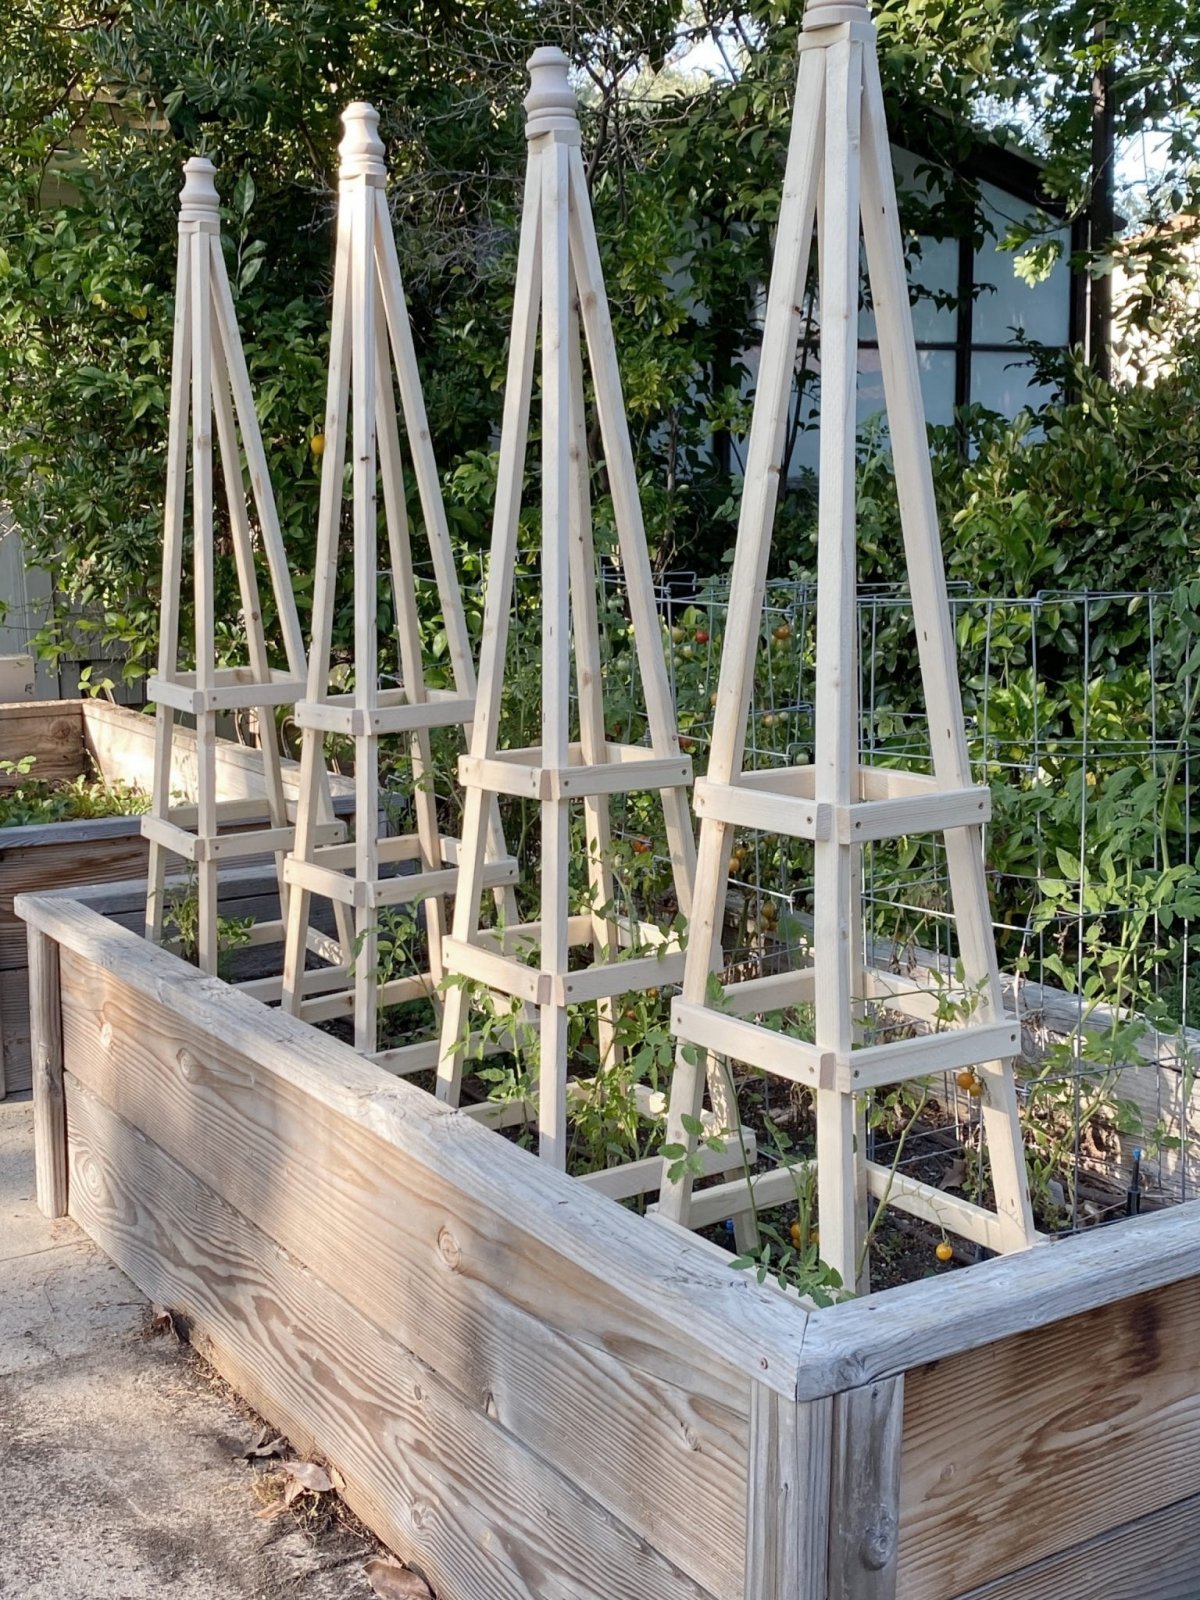 The Easiest Way to Build Tomato Cages